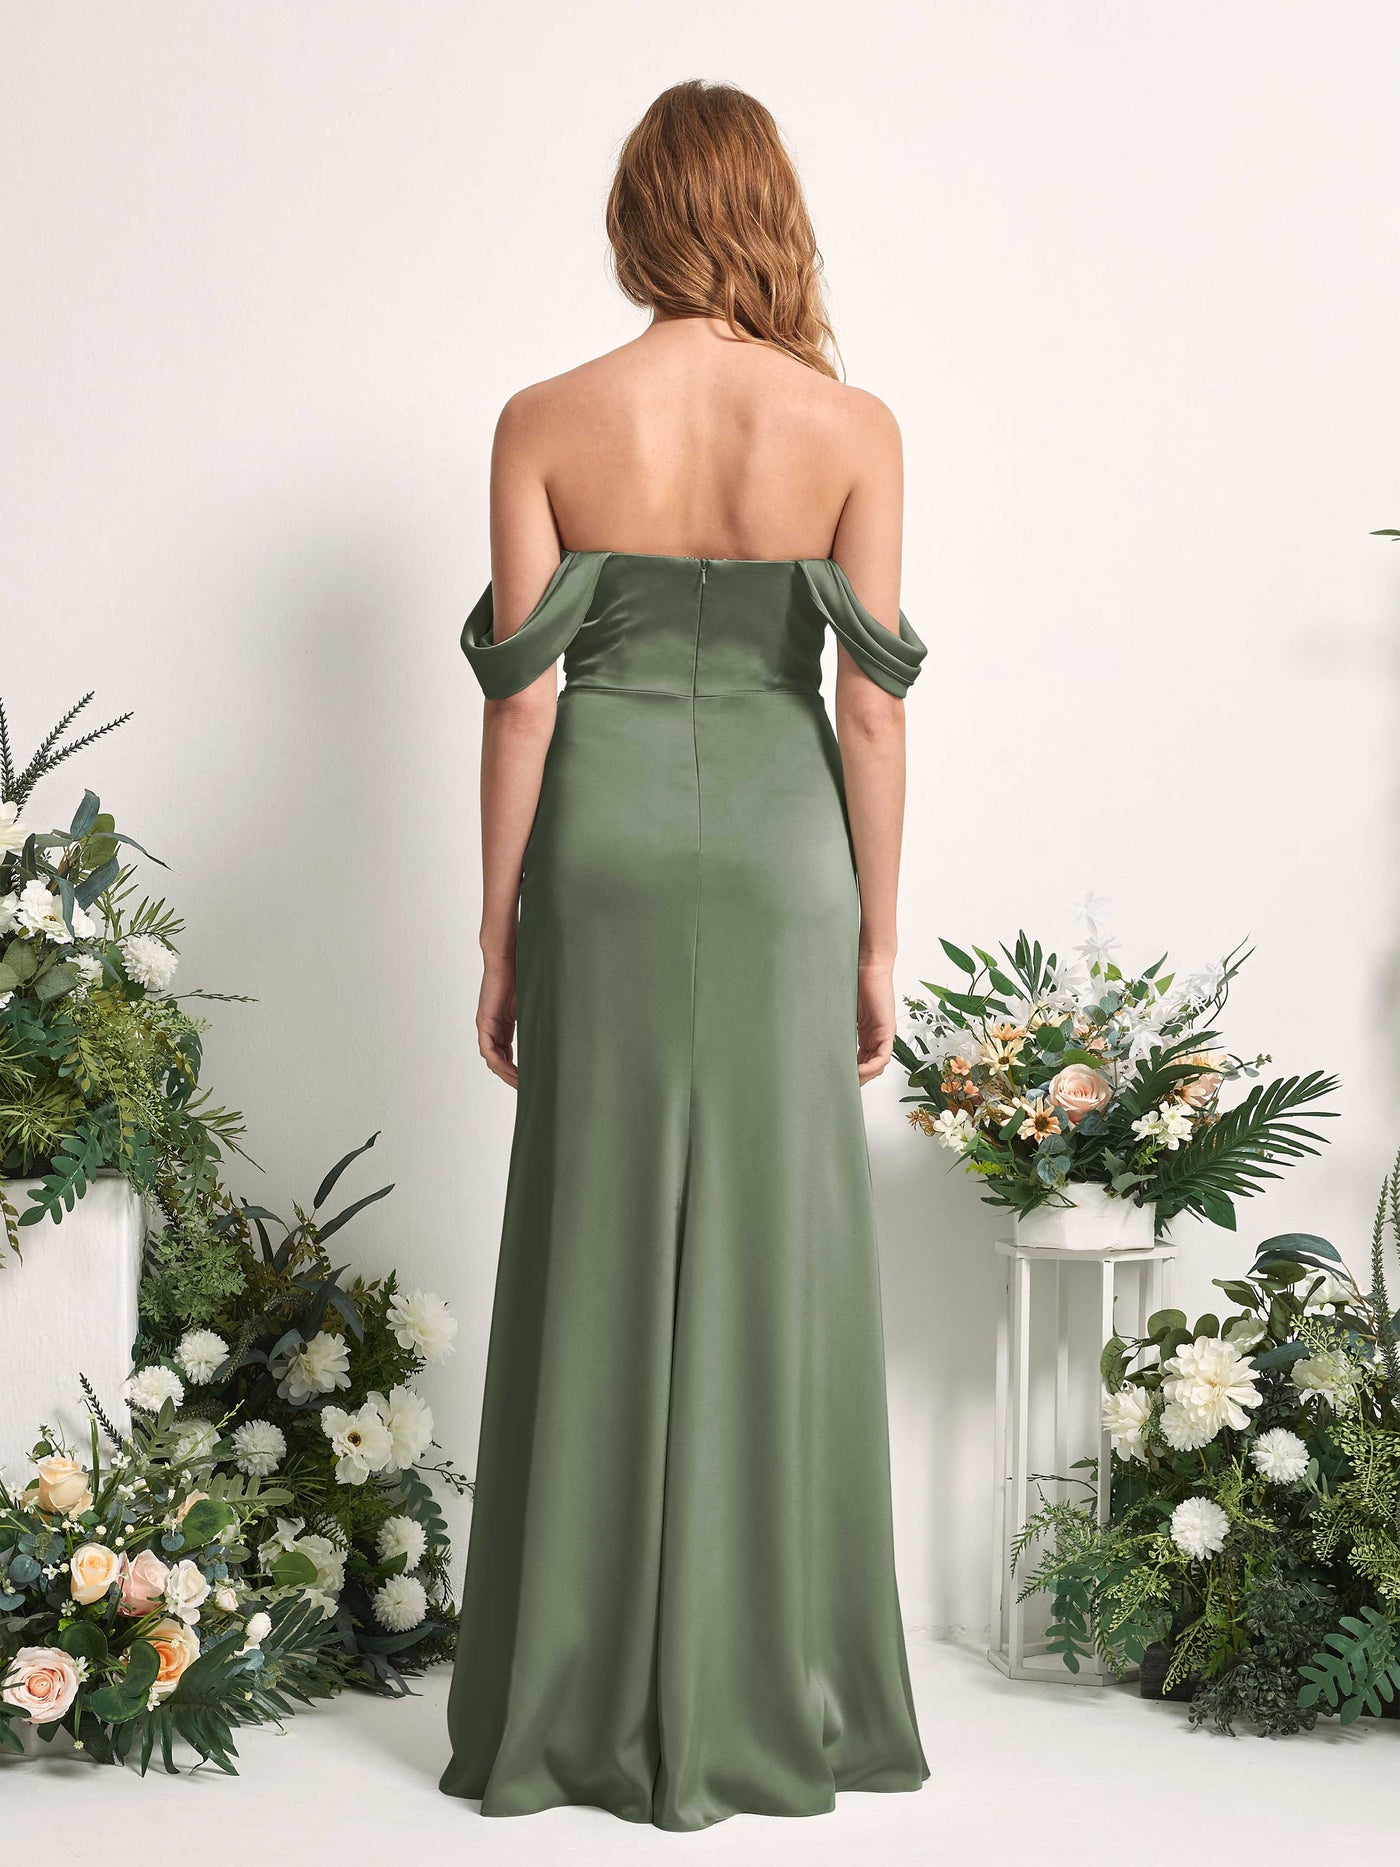 Green Olive Bridesmaid Dresses Bridesmaid Dress A-line Satin Off Shoulder Full Length Sleeveless Wedding Party Dress (80225270)#color_green-olive